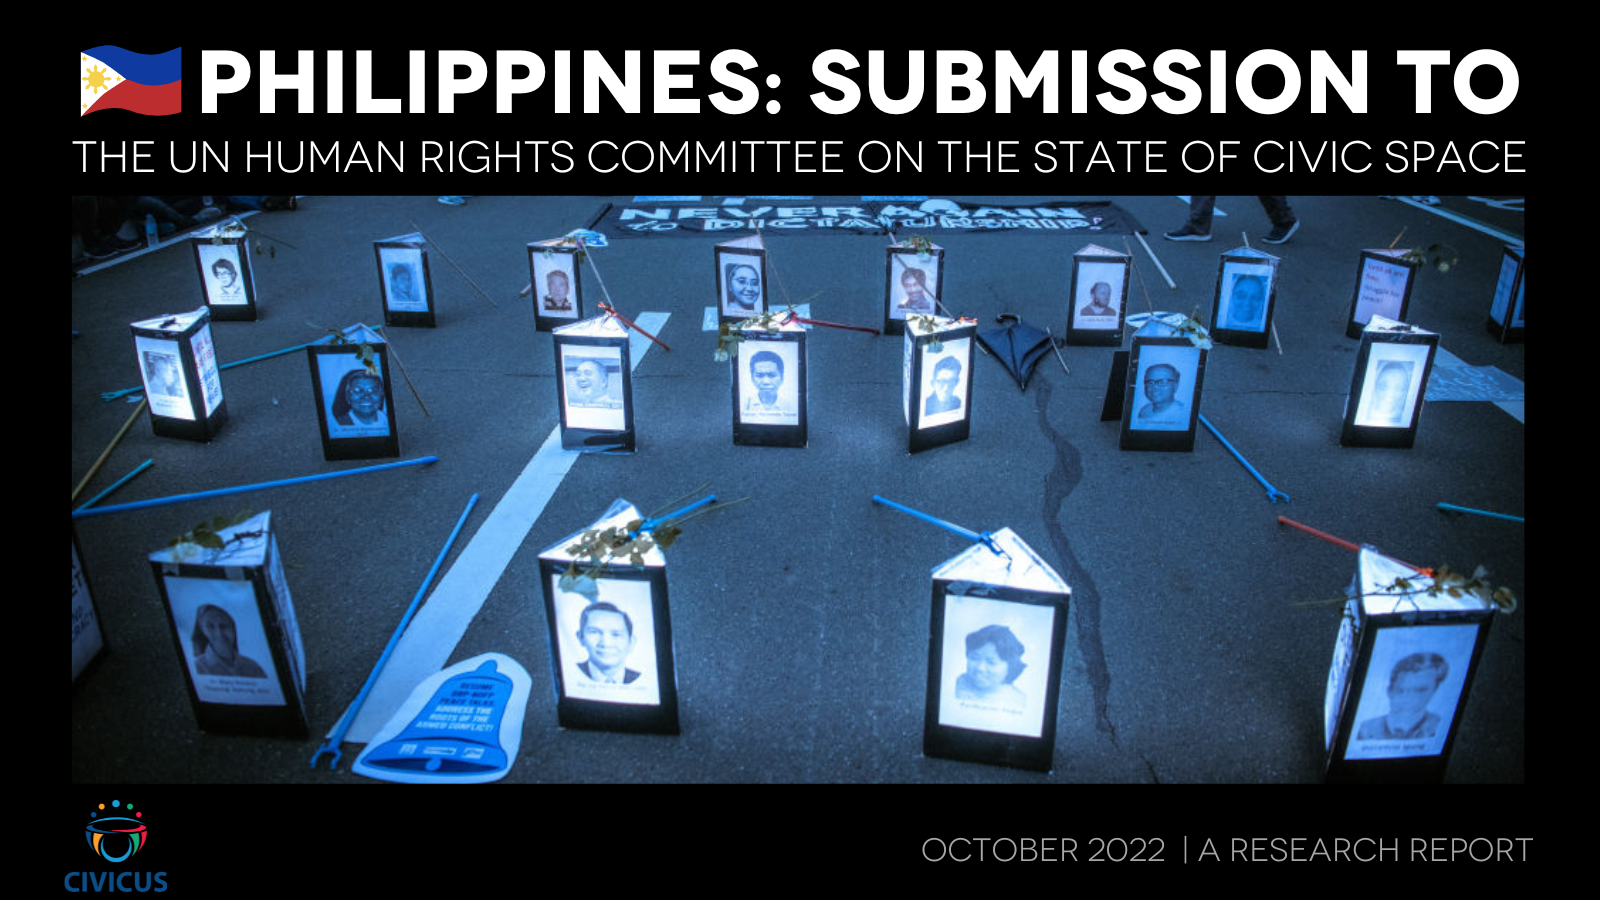 Philippines: Submission to the UN Human Rights Committee on the deterioration of civic space 